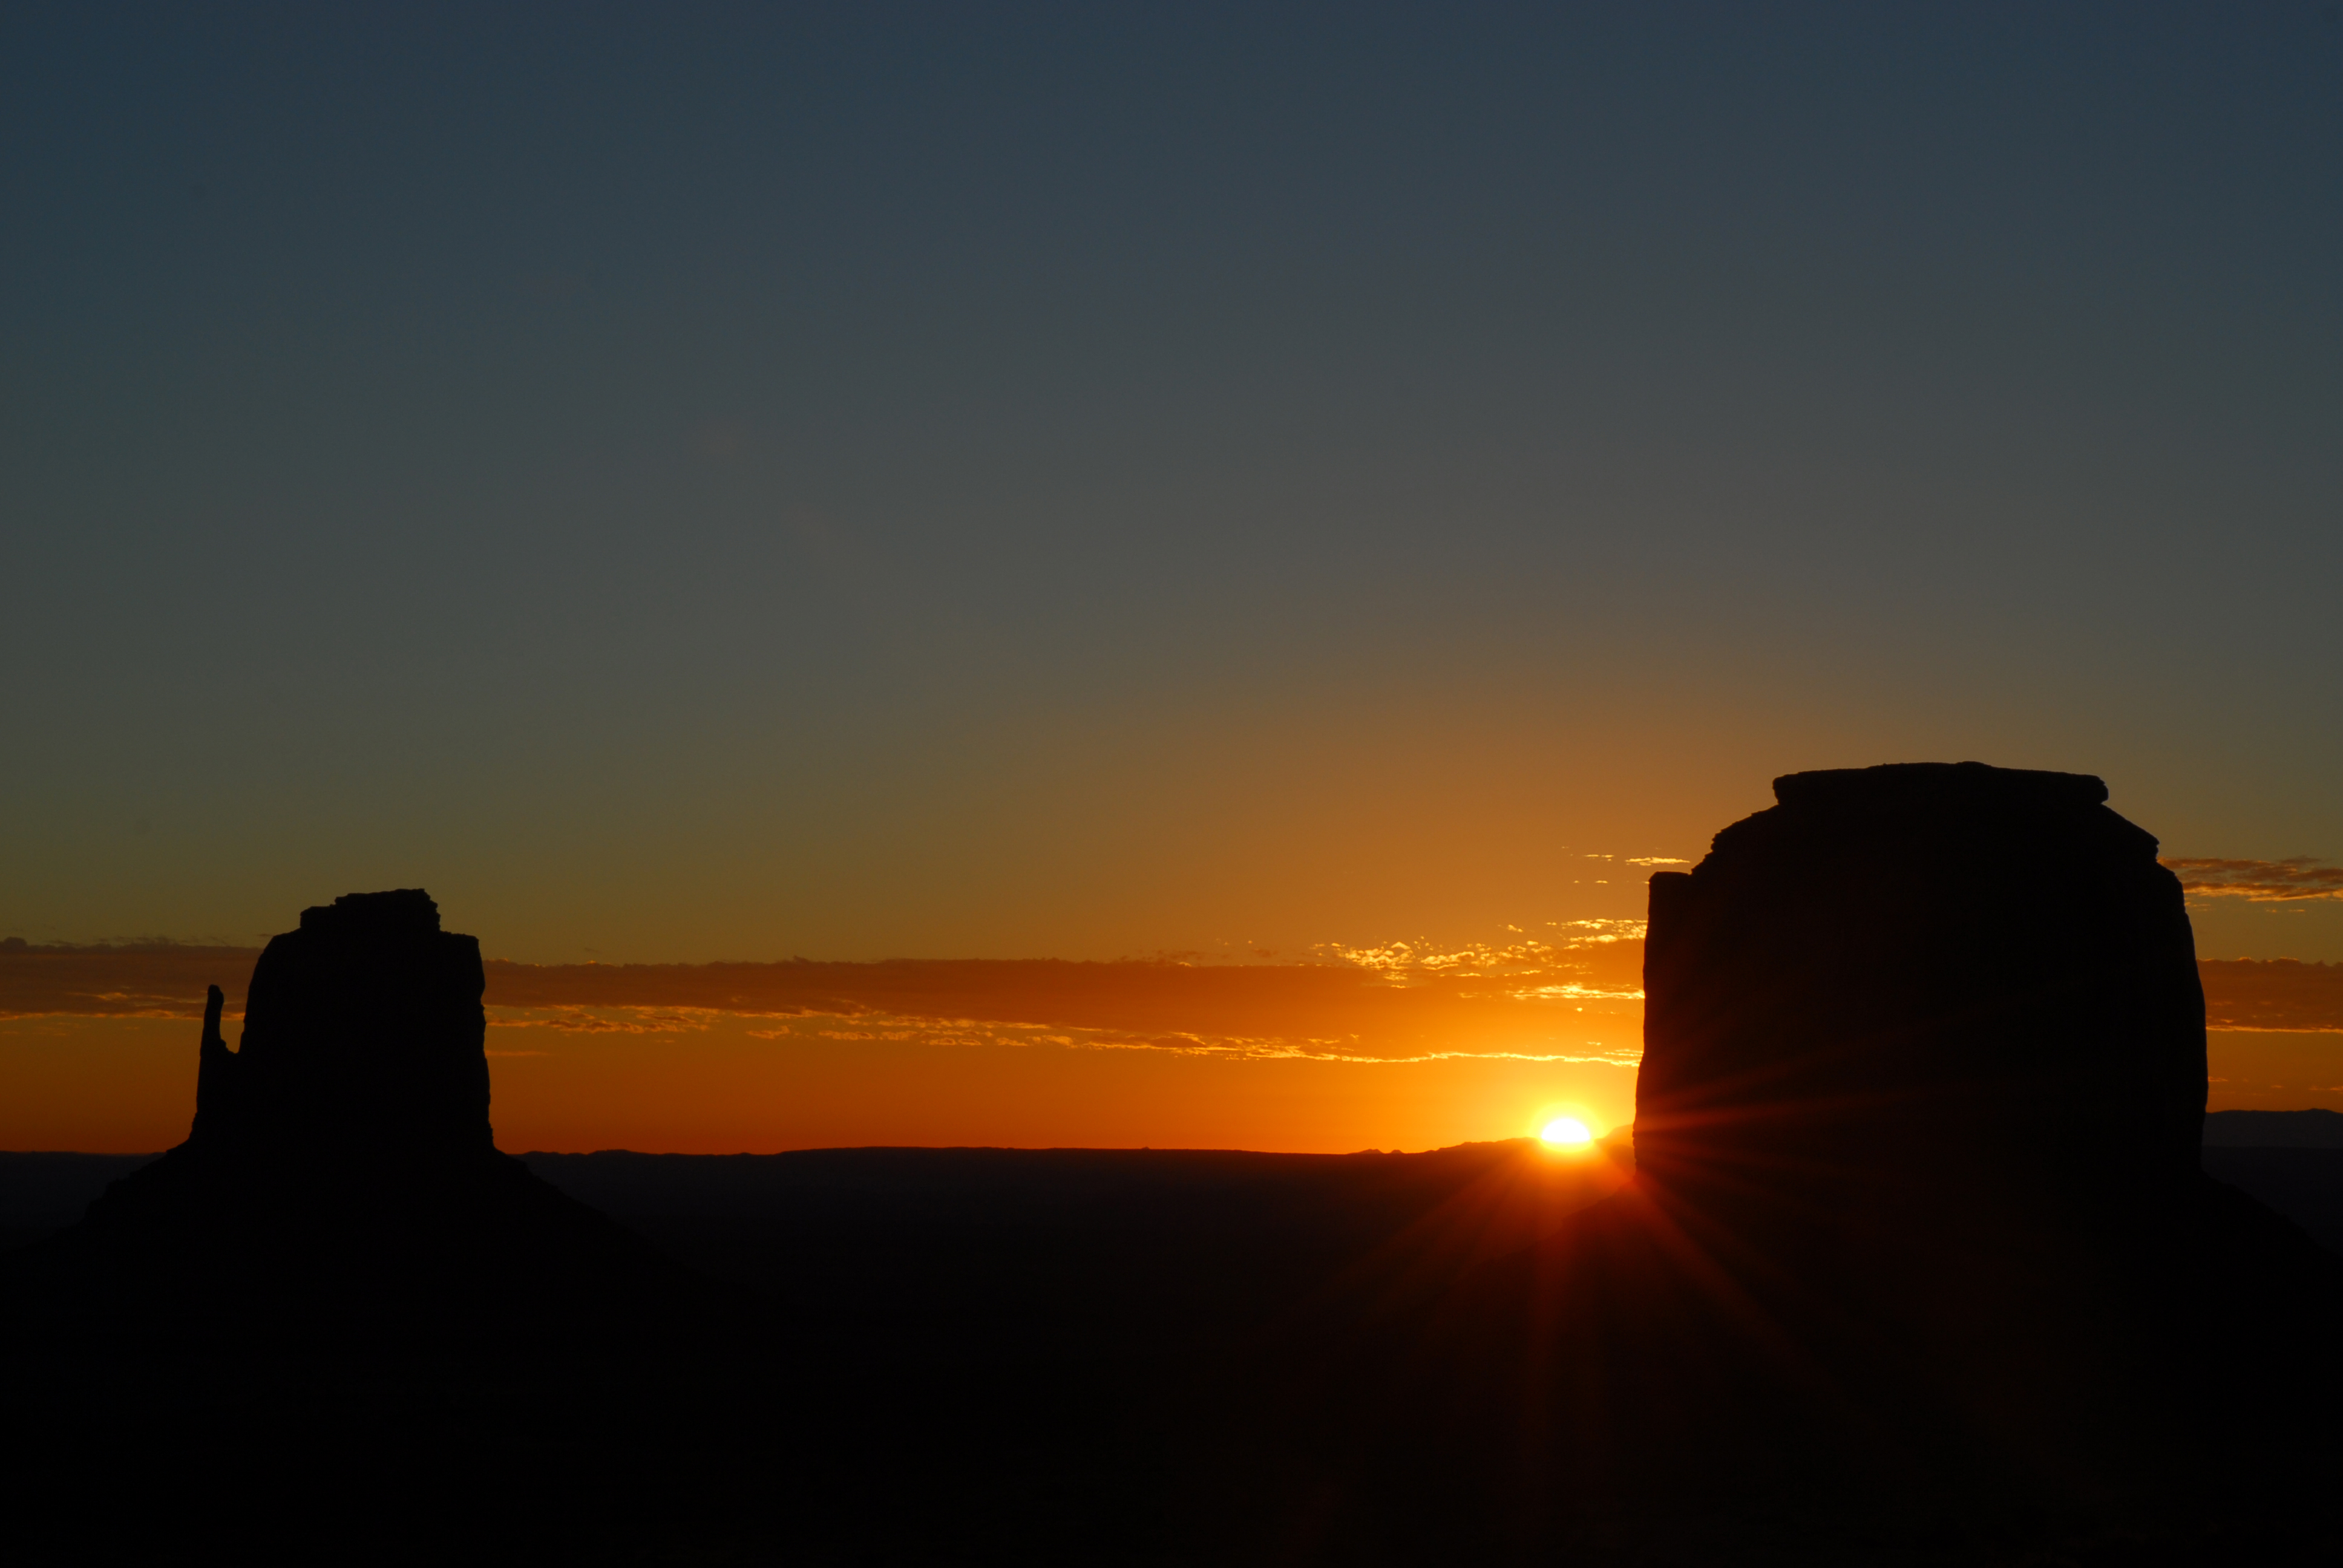 East Mitten Butte (left) and Merrick Butte (right) at sunrise  -  Monument Valley Navajo Tribal Park, Arizona  